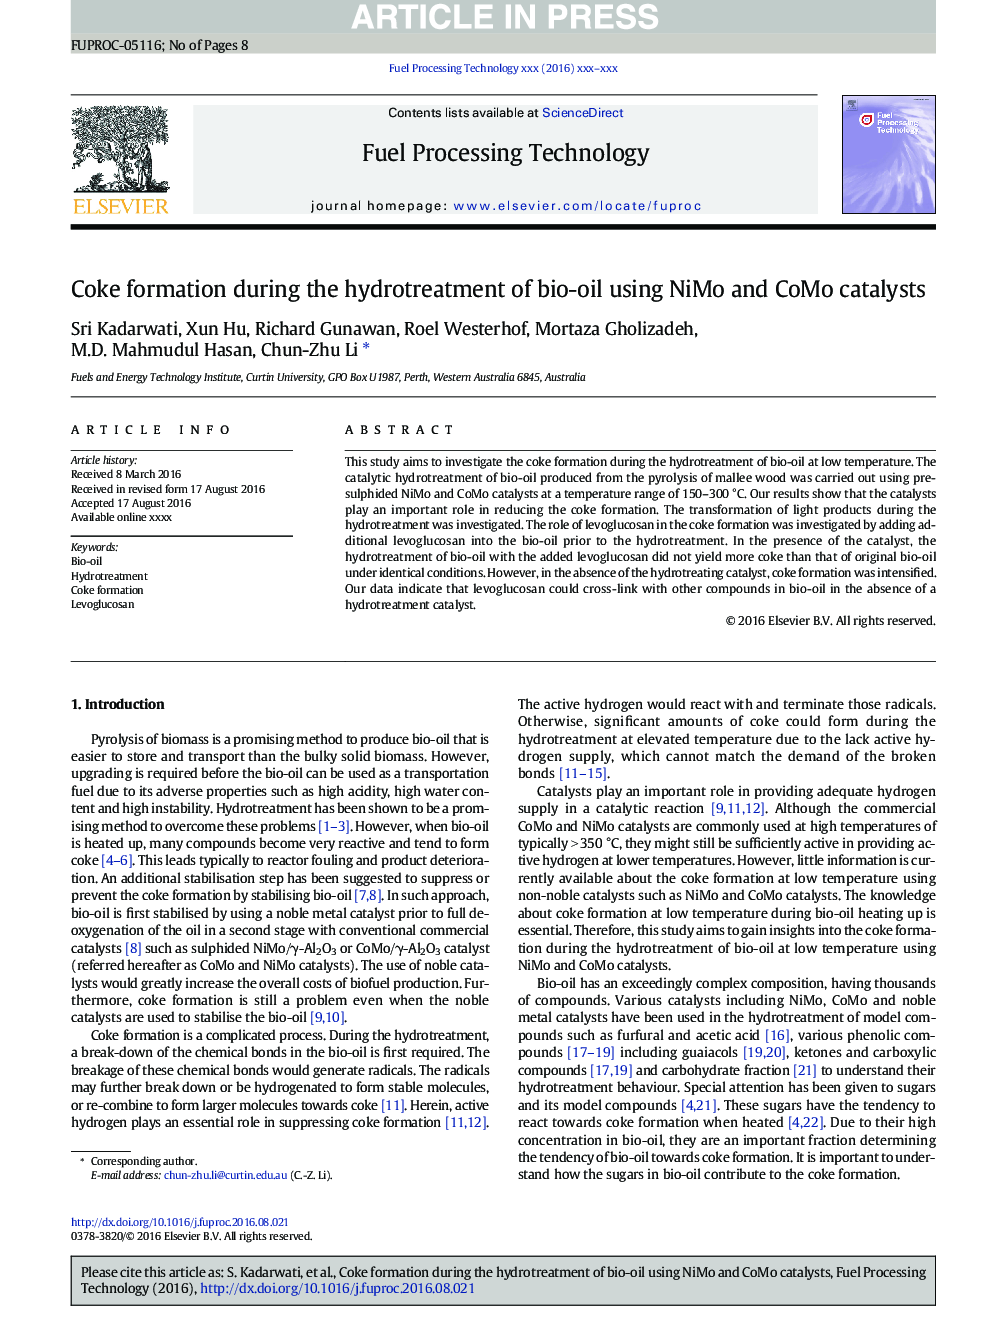 Coke formation during the hydrotreatment of bio-oil using NiMo and CoMo catalysts